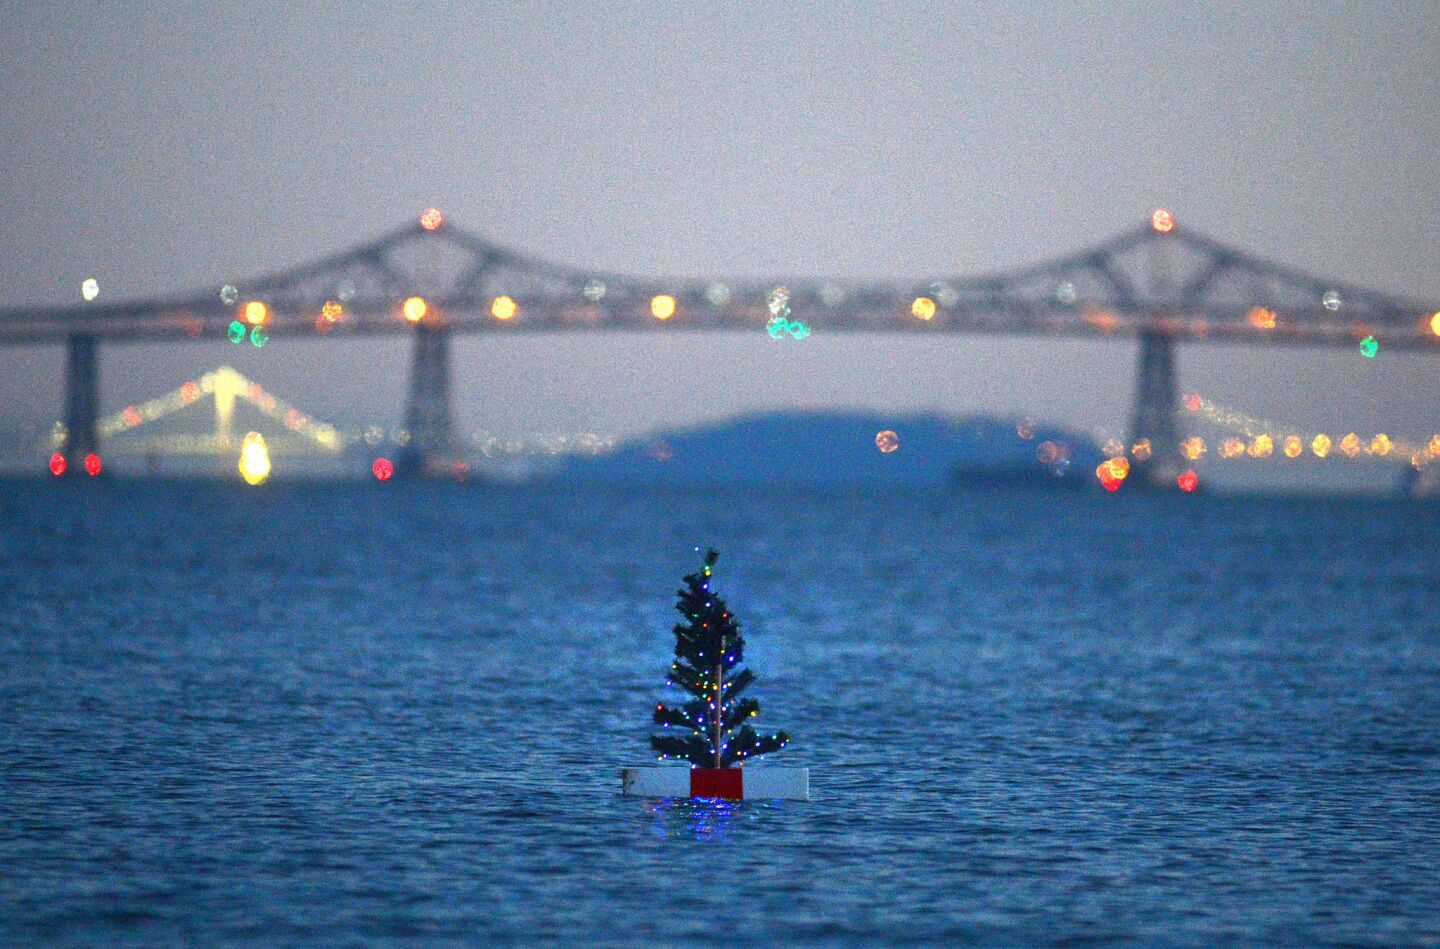 This Christmas tree is a bit of a mystery. It just showed up one day, bobbing on a raft on San Pablo Bay, a colorful backdrop provided by the Richmond-San Rafael Bridge. It's provided many smiles and photo ops for passersby, helping them get into the holiday spirit. But many in the area still wonder: Whodunnit?